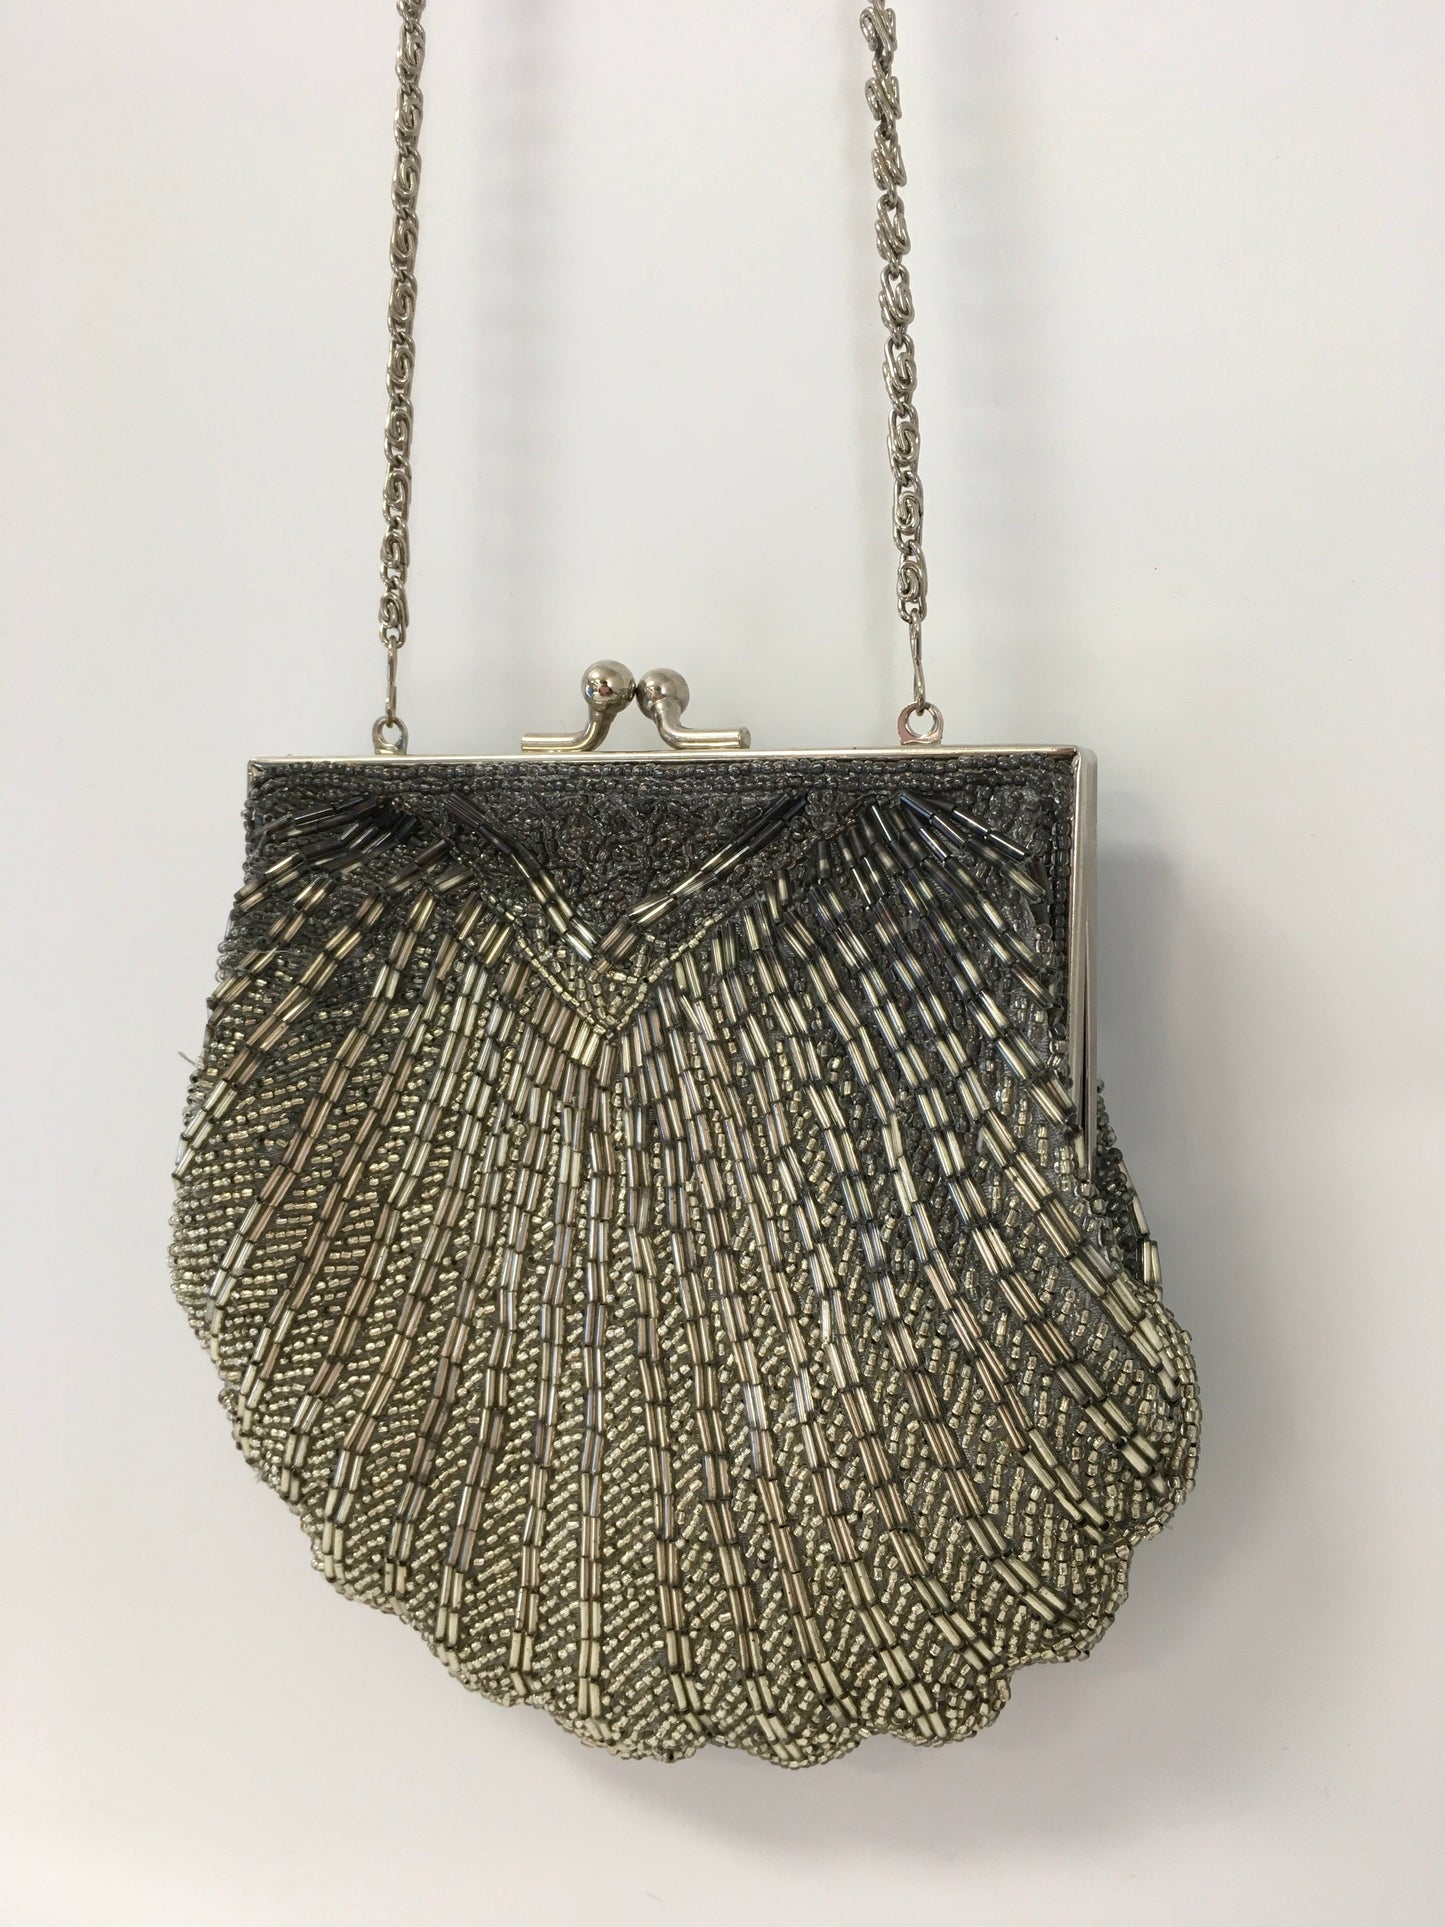 Clutch By Valerie Stevens  Size: Small